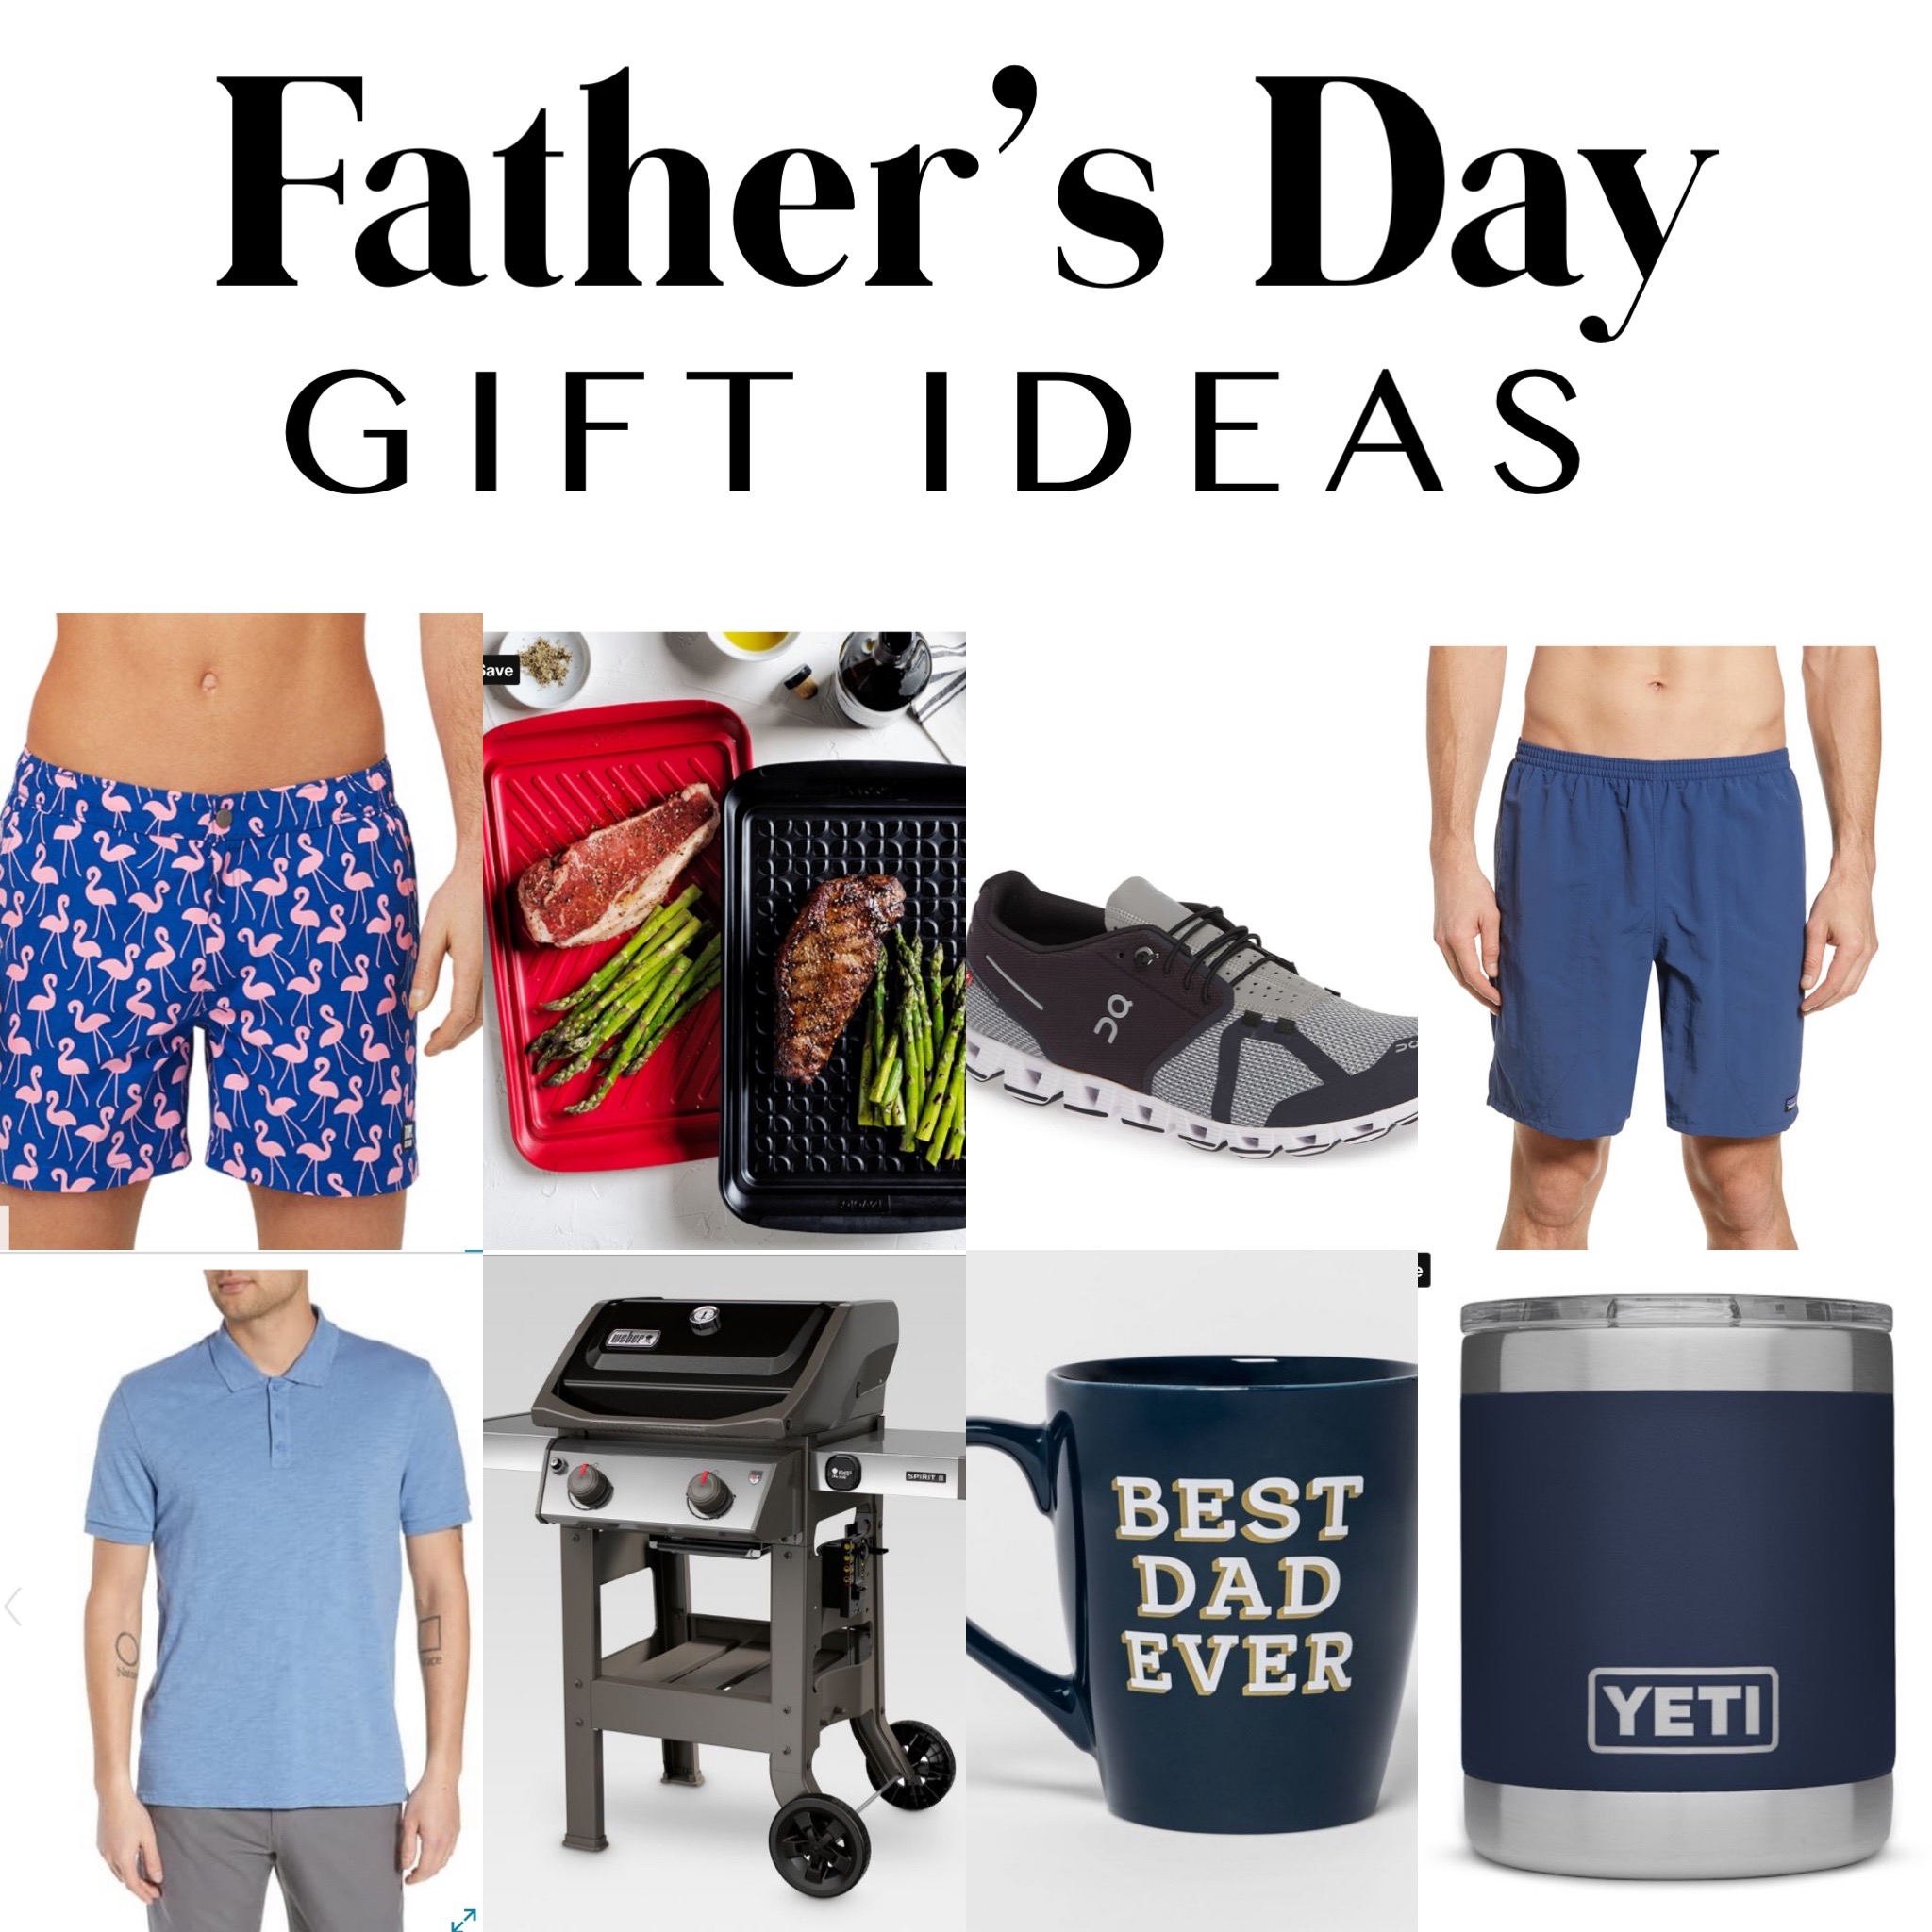 Fathers Day gift ideas 2020, classic dad, grill